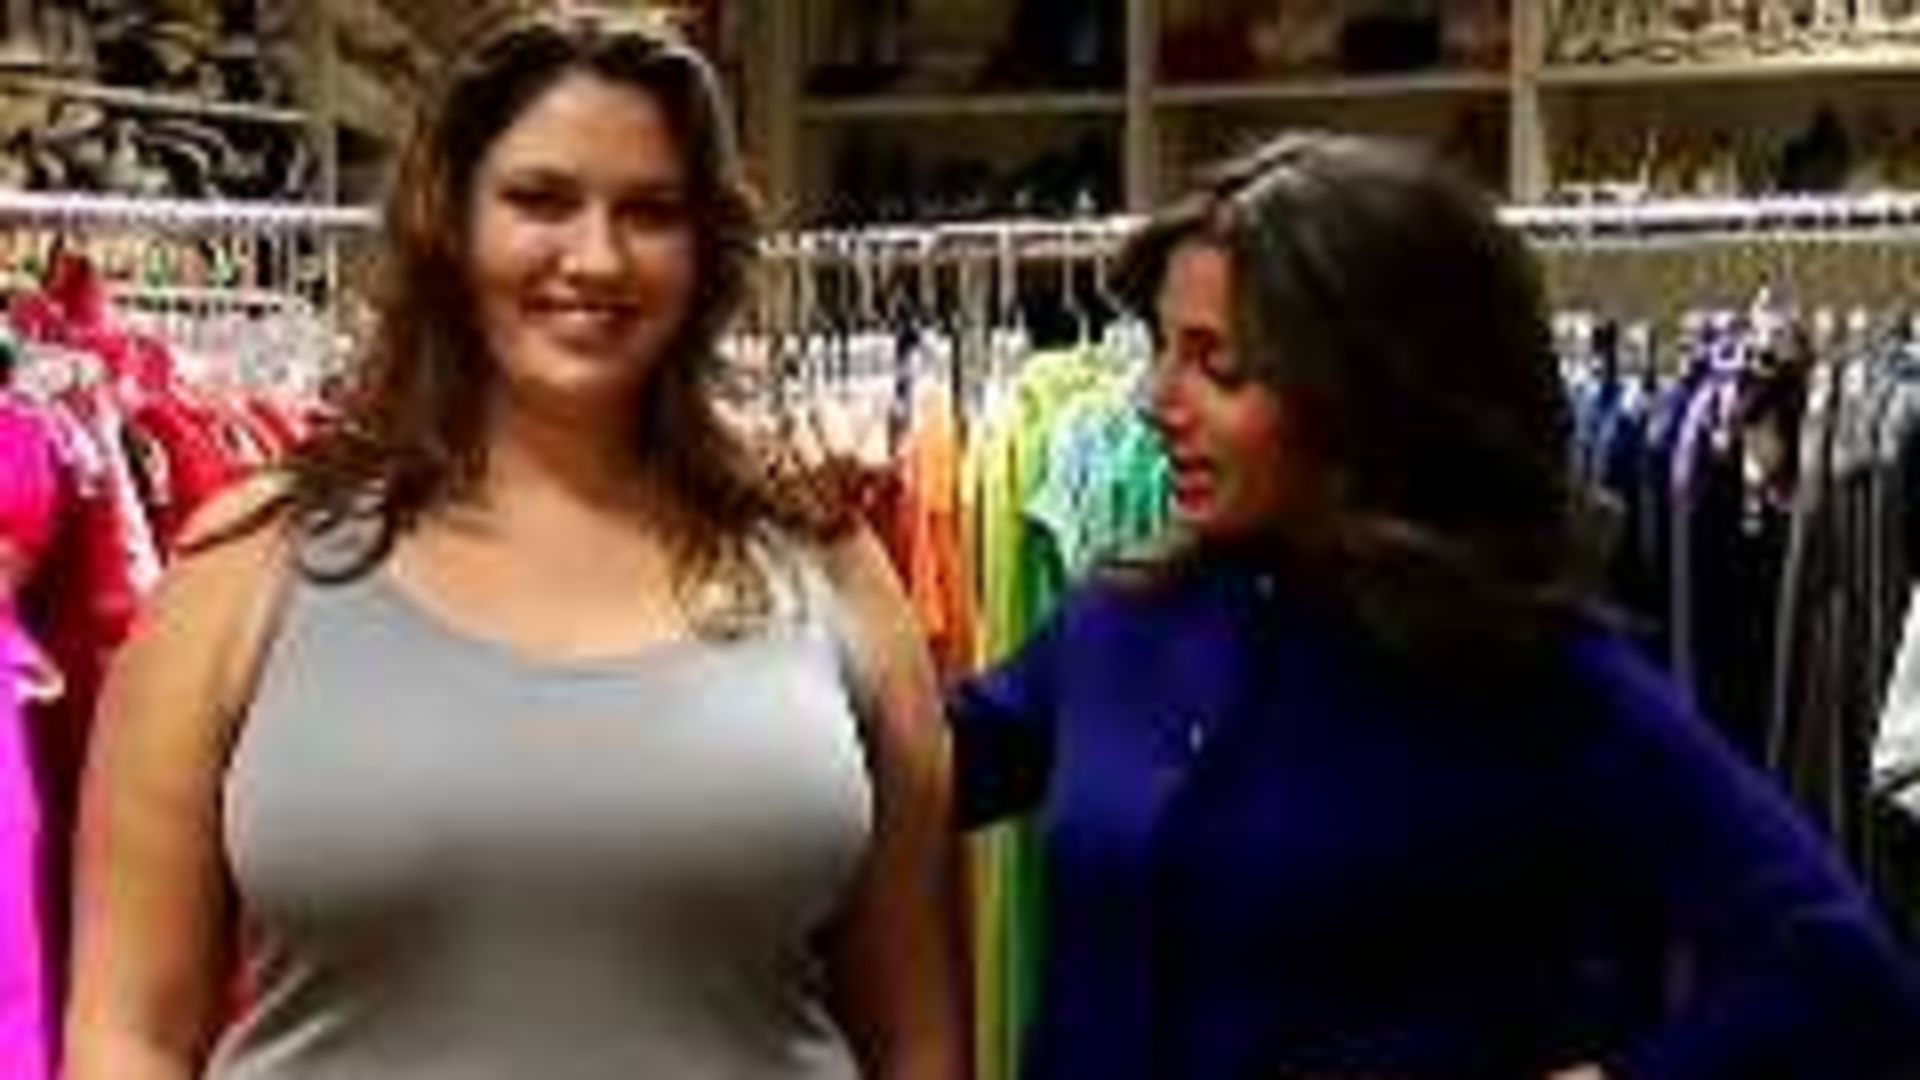 Watch How to Dress 10 Pounds Thinner for Spring, Dress Your Body